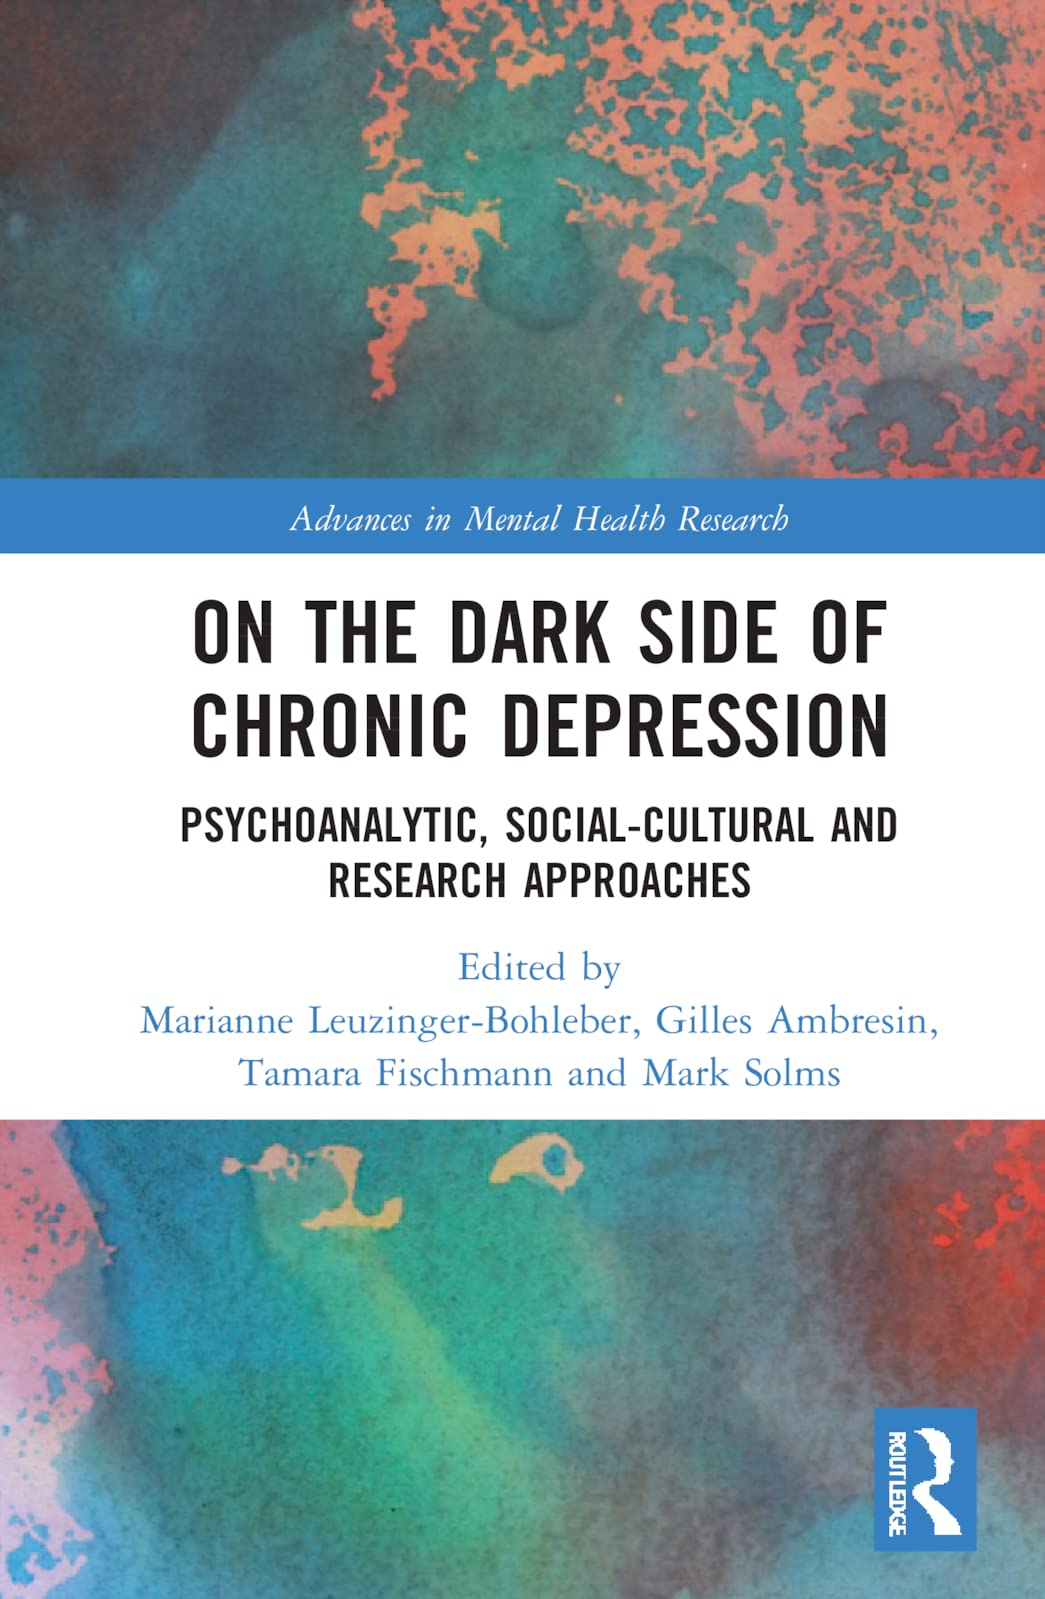 On the Dark Side of Chronic Depression (Advances in Mental Health Research) by Marianne Leuzinger-Bohleber